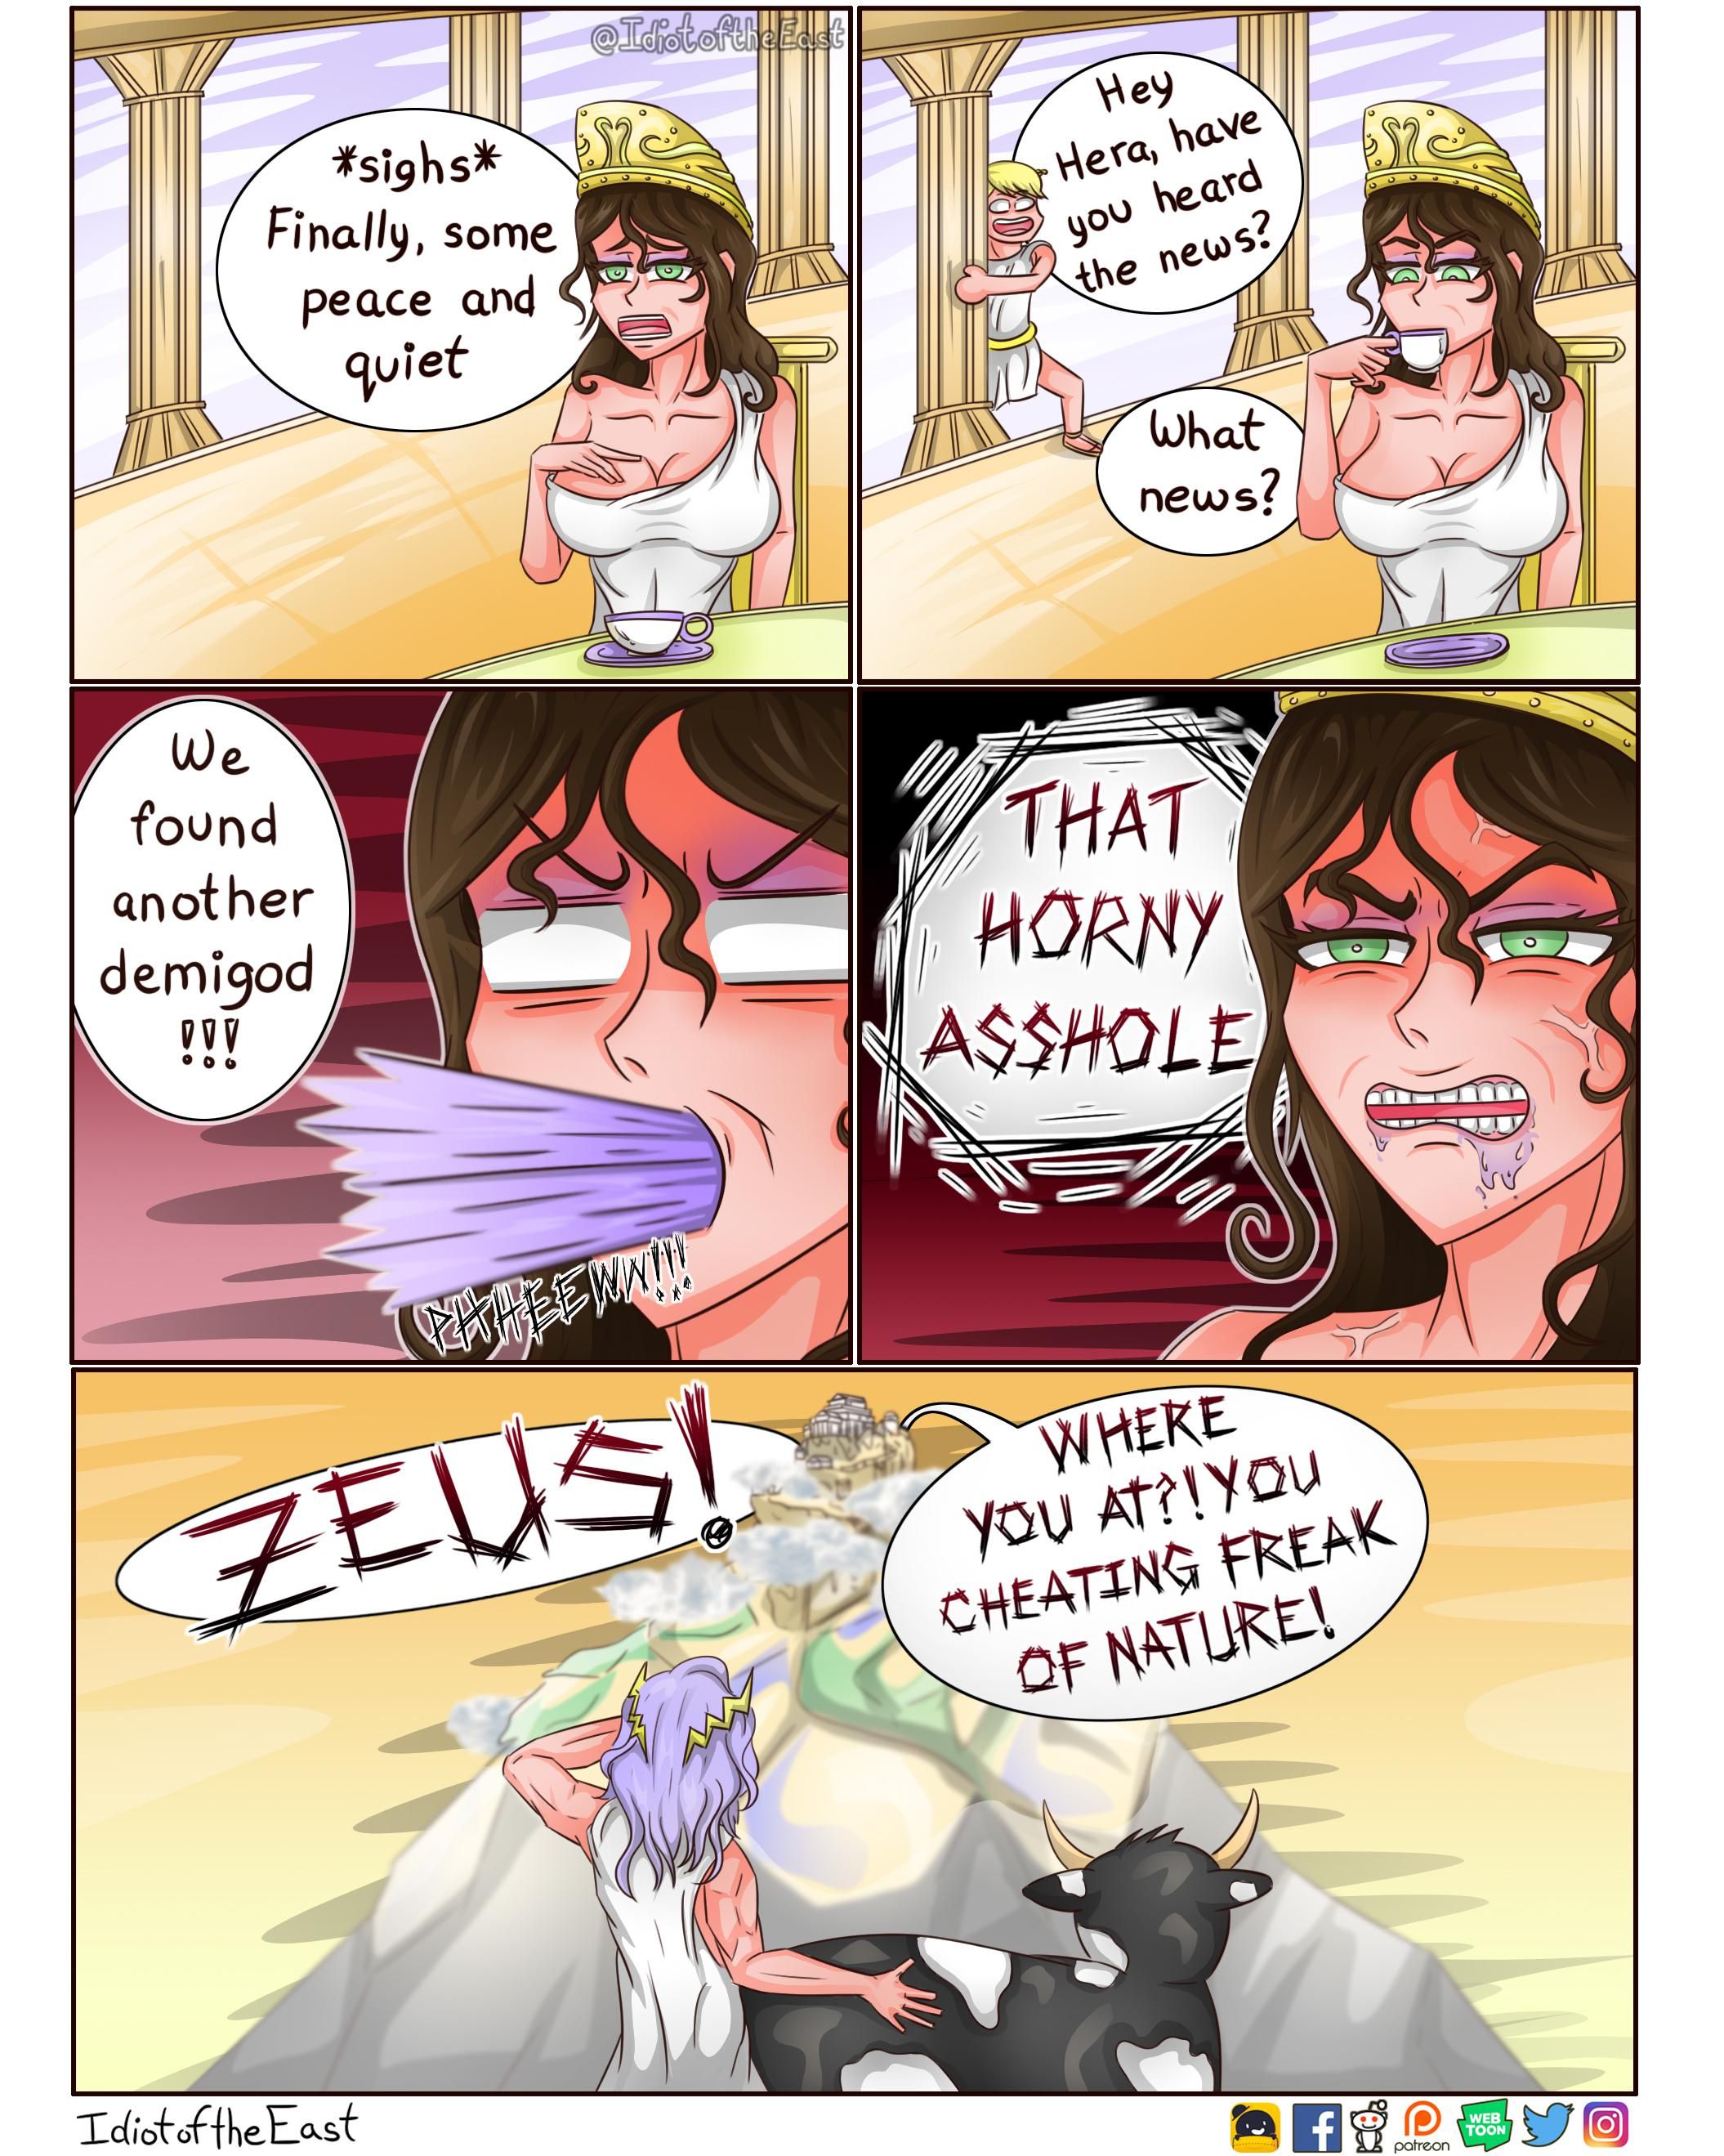 Greek Mythology in a nutshell... yes, Zeus was a freak of nature and he deserve to be *bonked*